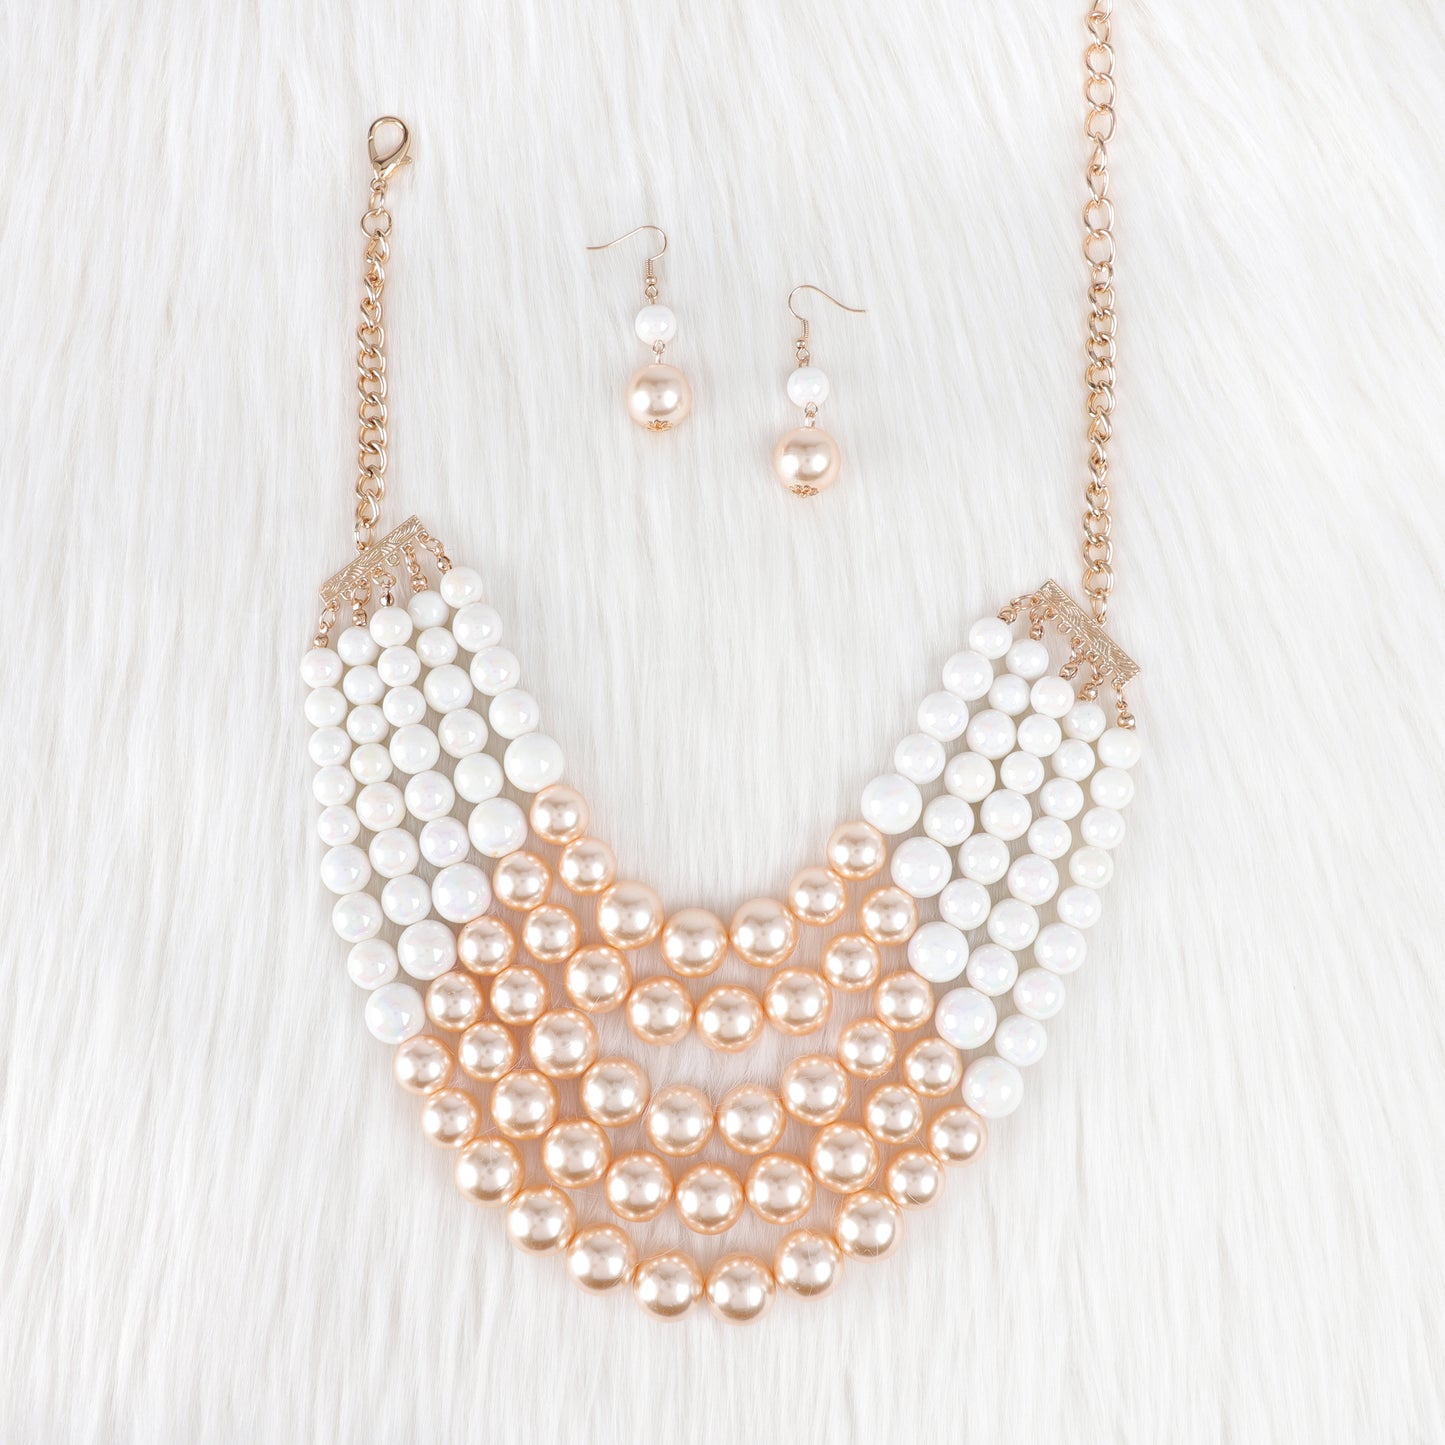 Josephine 5 Strand Pearl Necklace & Earring Set